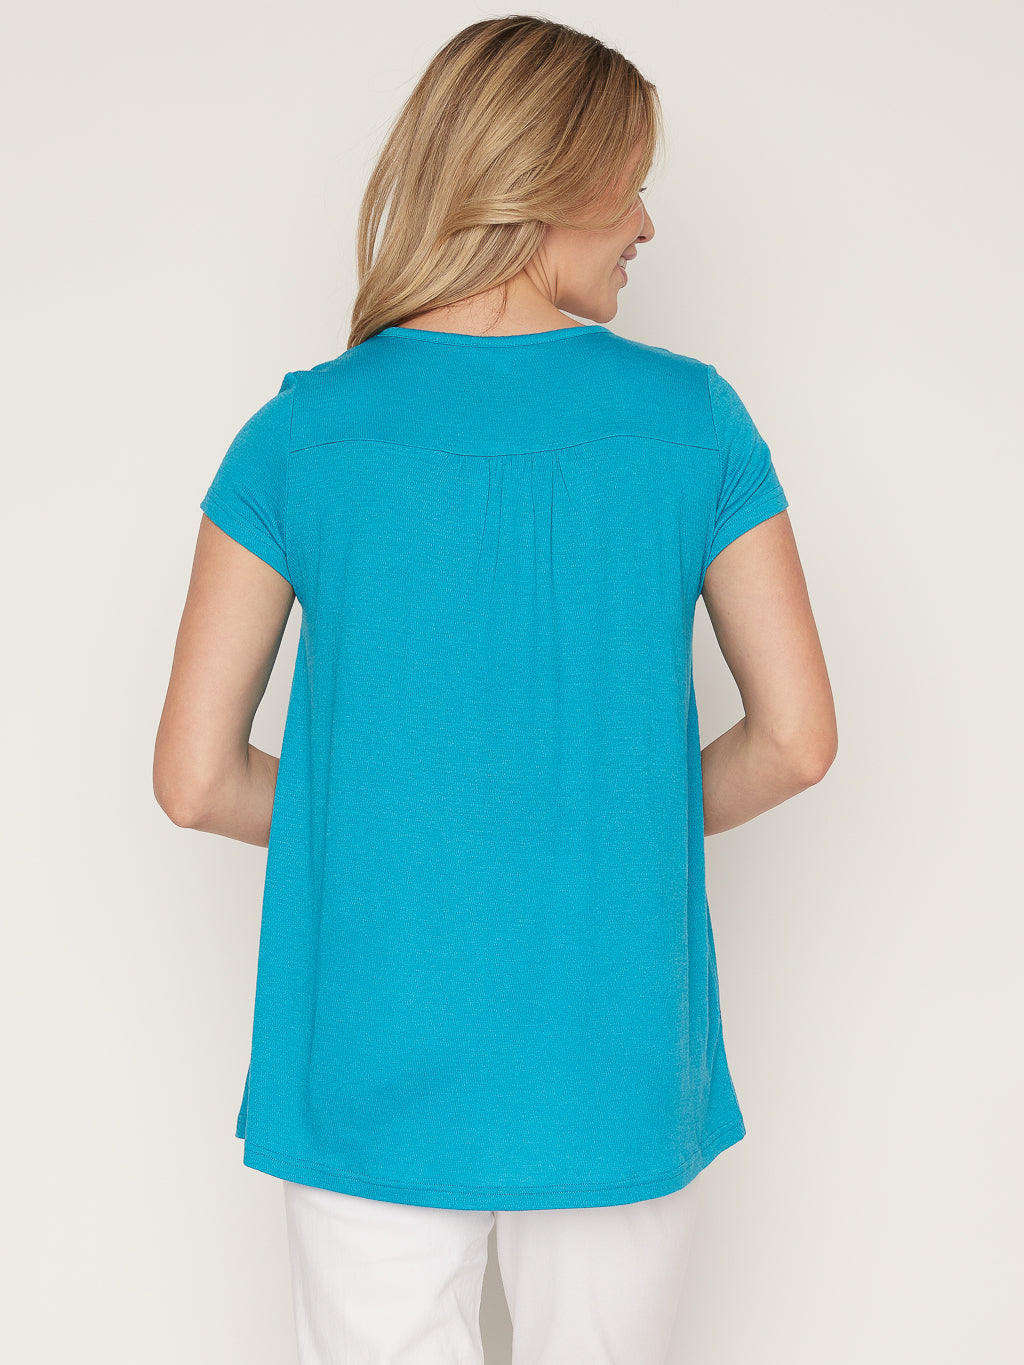 Short-sleeve semi-fitted tunic